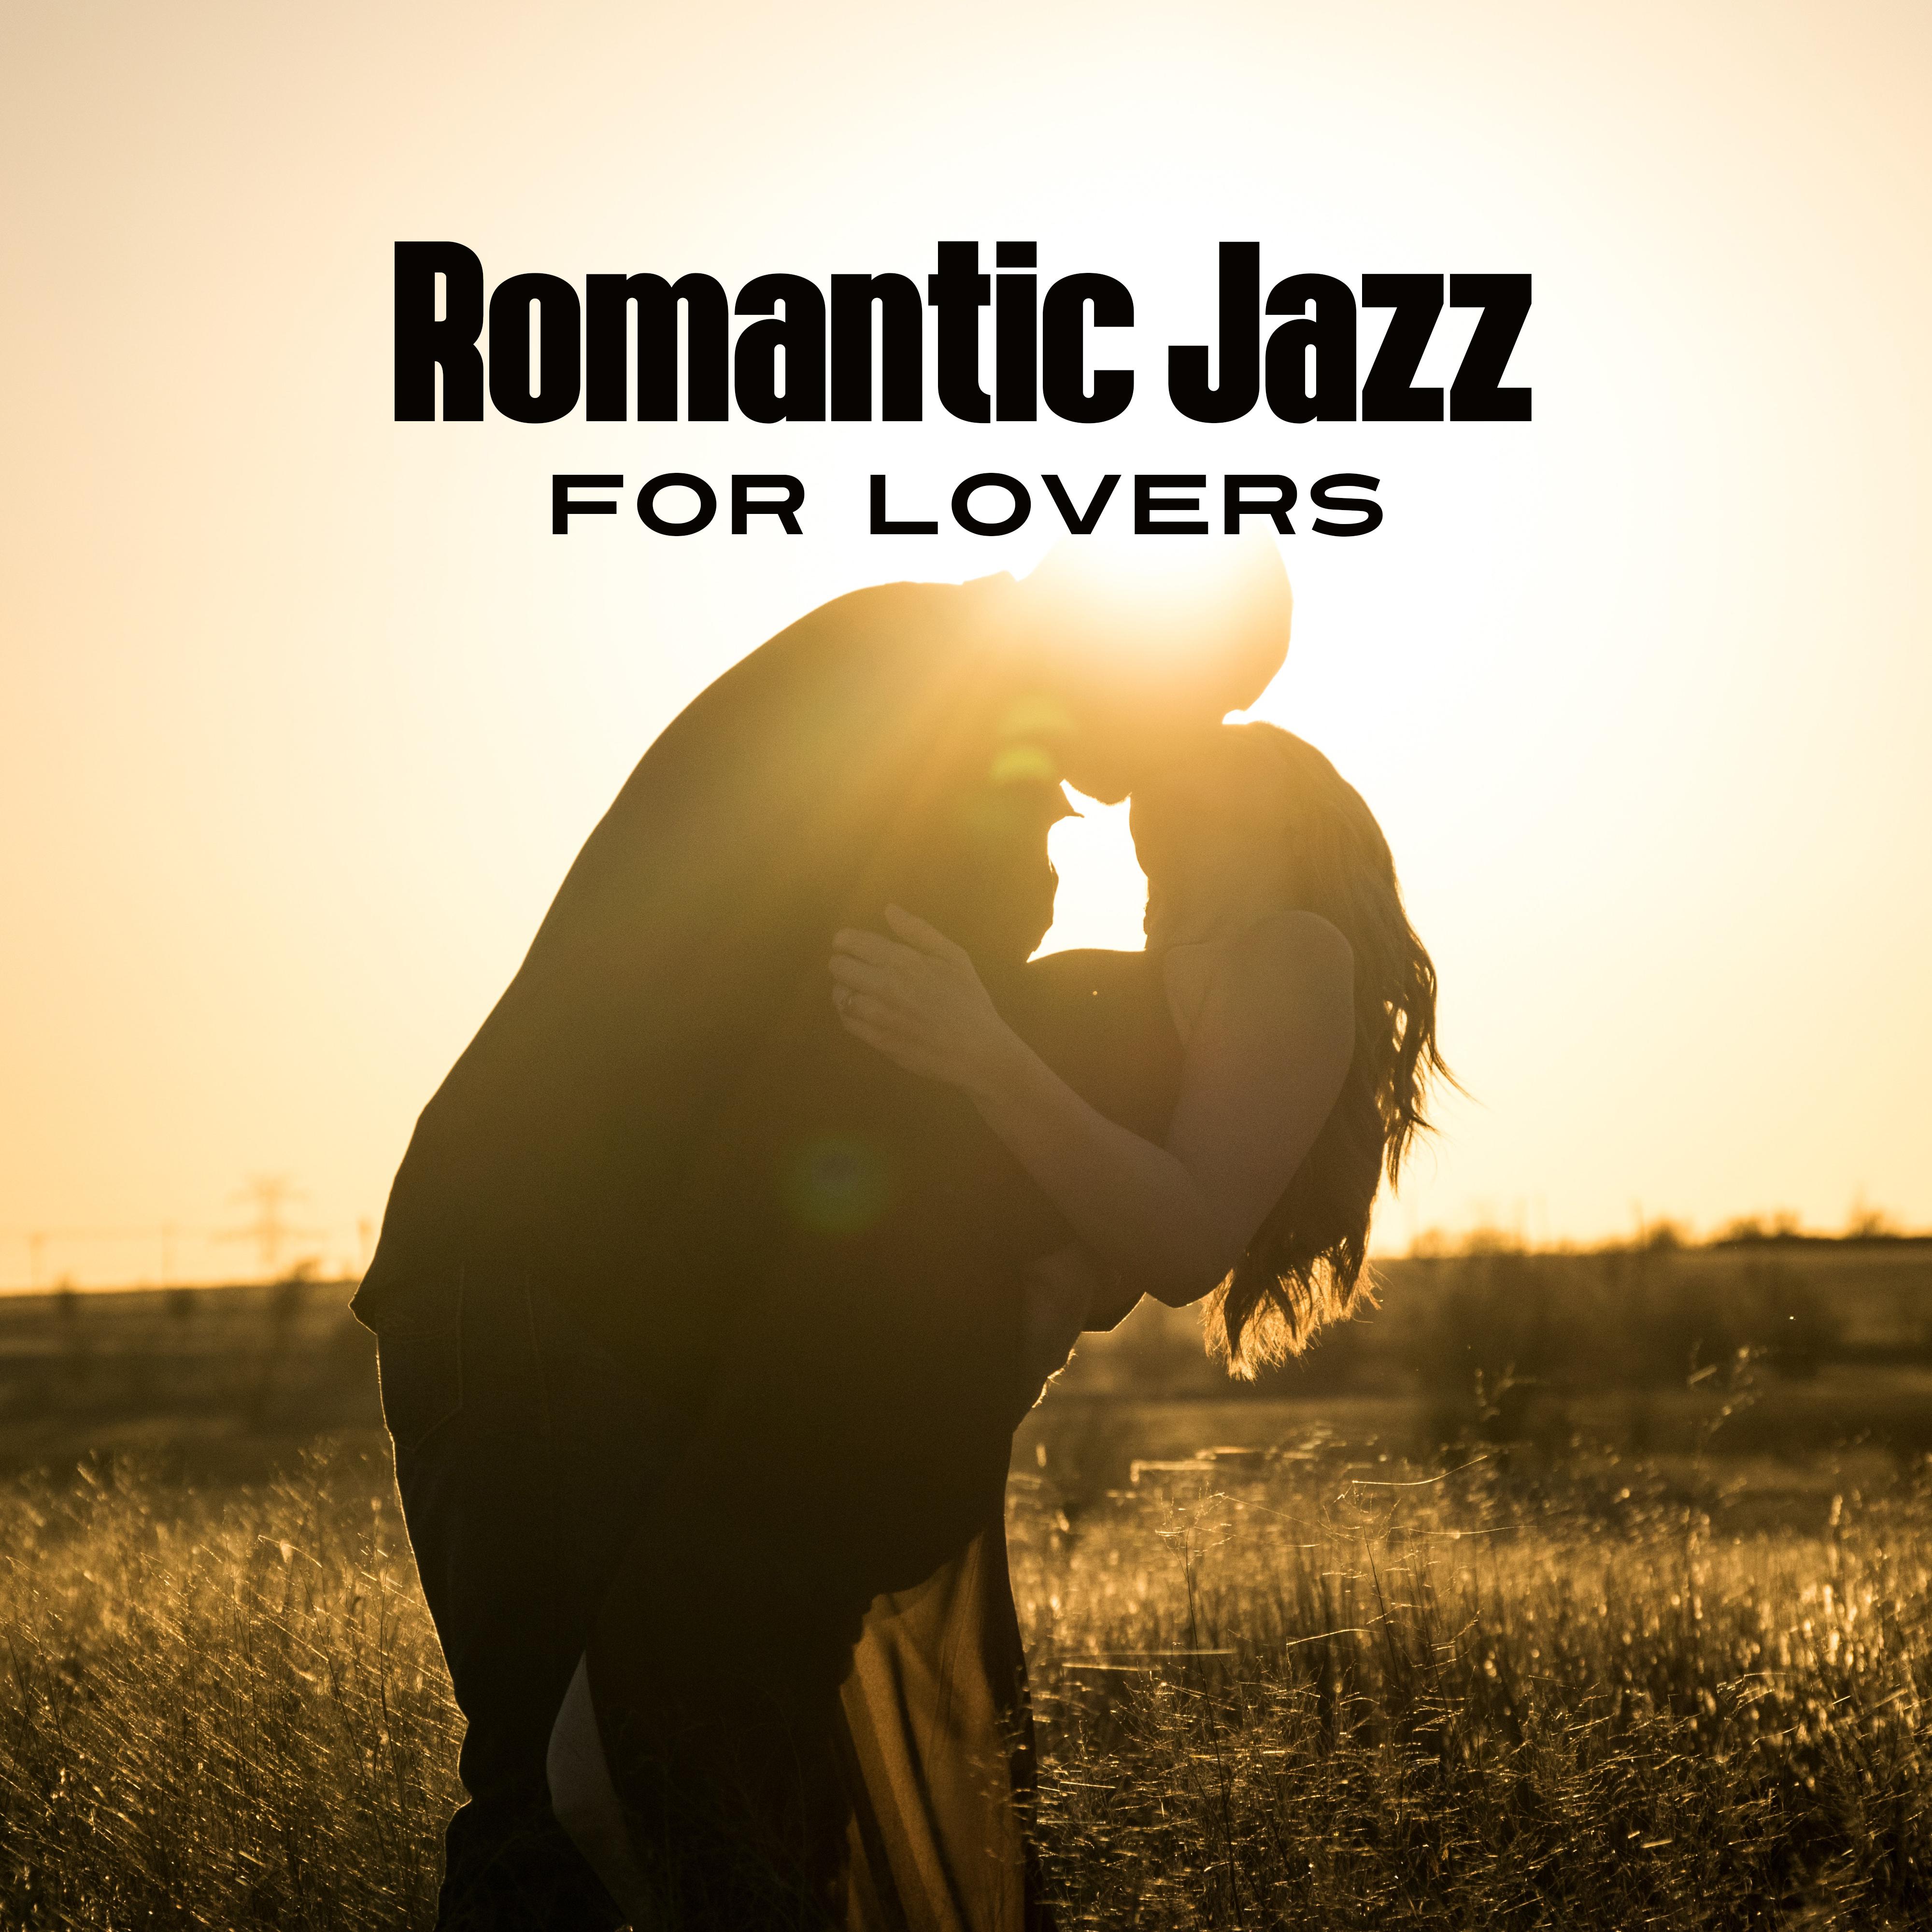 Romantic Jazz for Lovers – Smooth Sounds, Romantic Music, Peaceful Jazz for Lovers, Instrumental Jazz, Moonlight Note